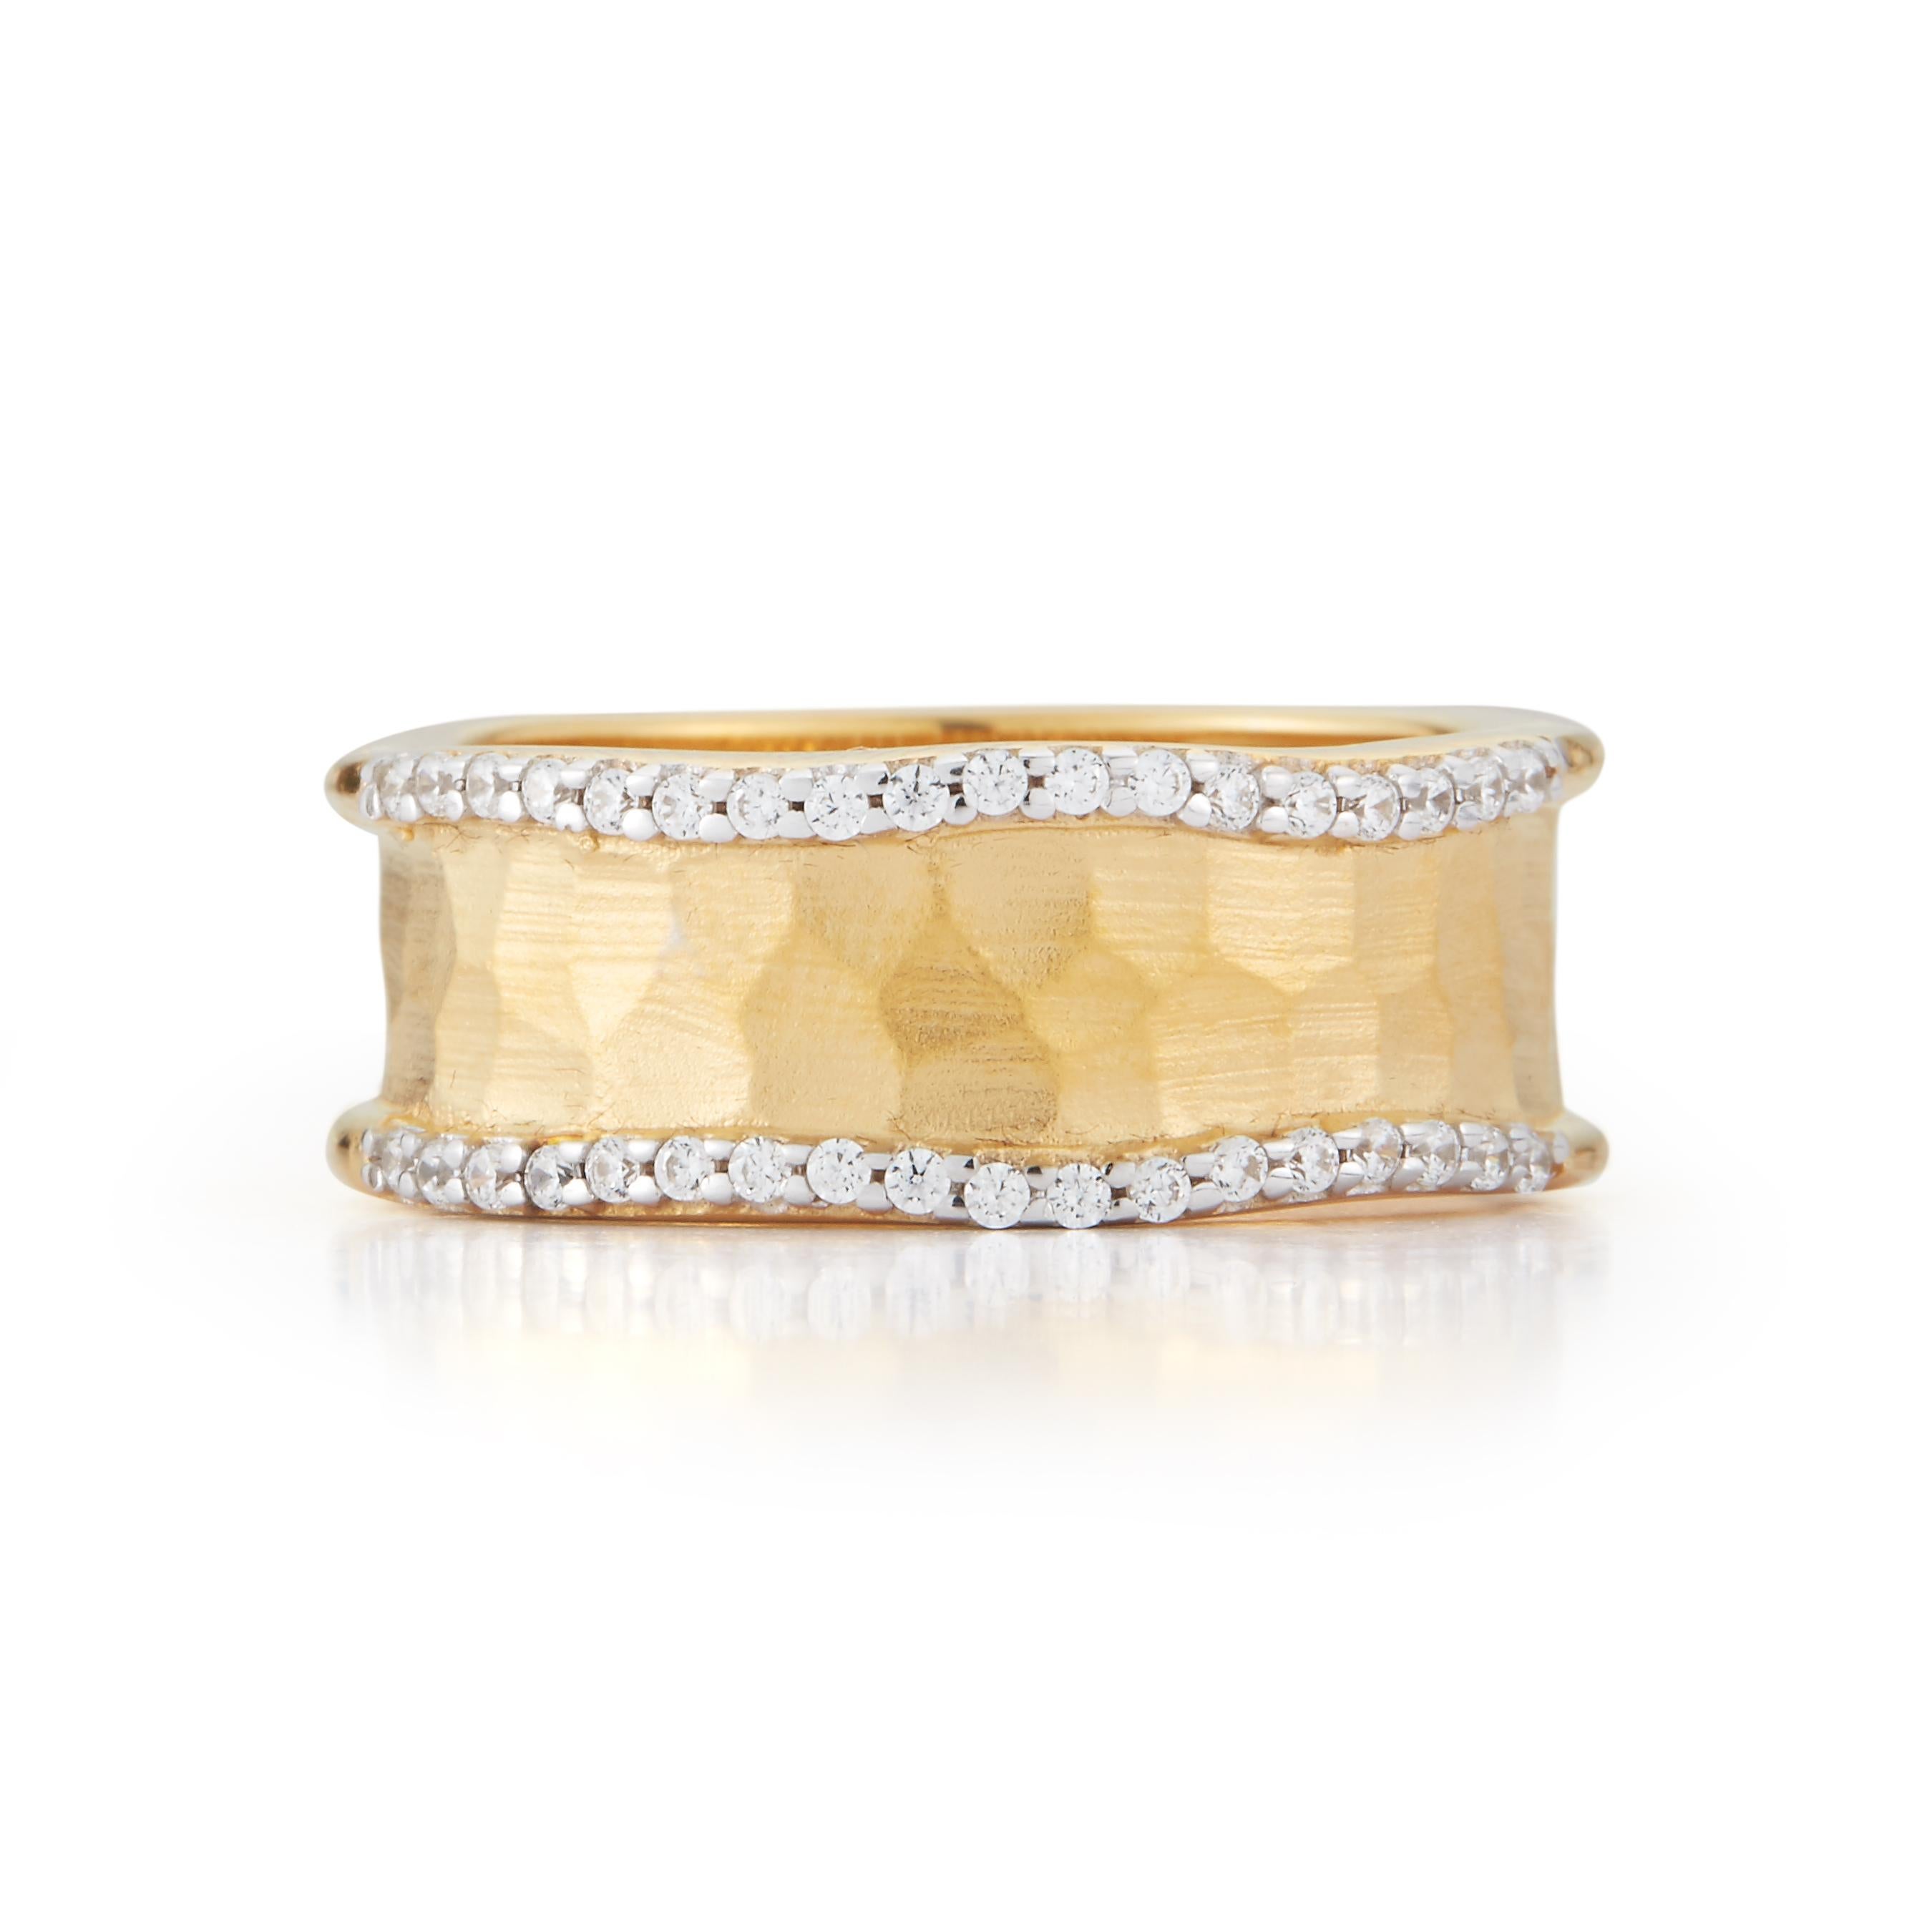 14 Karat Yellow Gold Matte and Hammer-Finished Scallop-Edged 8mm Ring, Accented with 0.22 Carats of Pave Set Diamonds.
